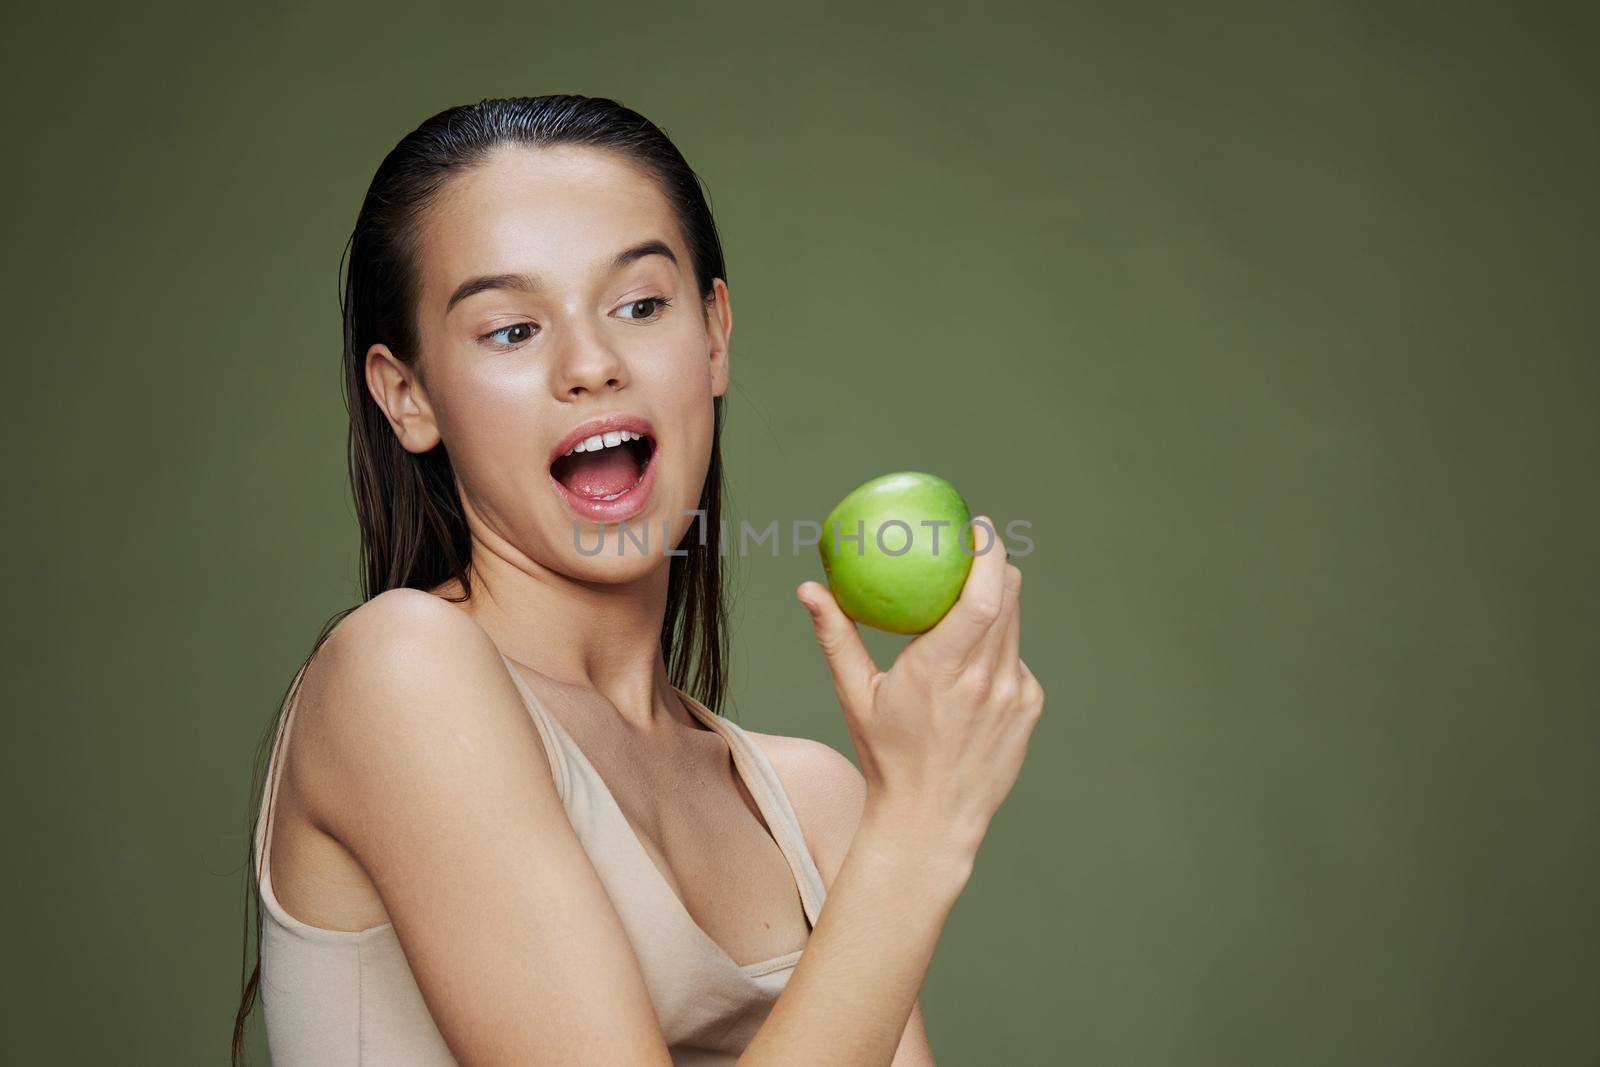 young woman with a green apple smile close-up Lifestyle. High quality photo